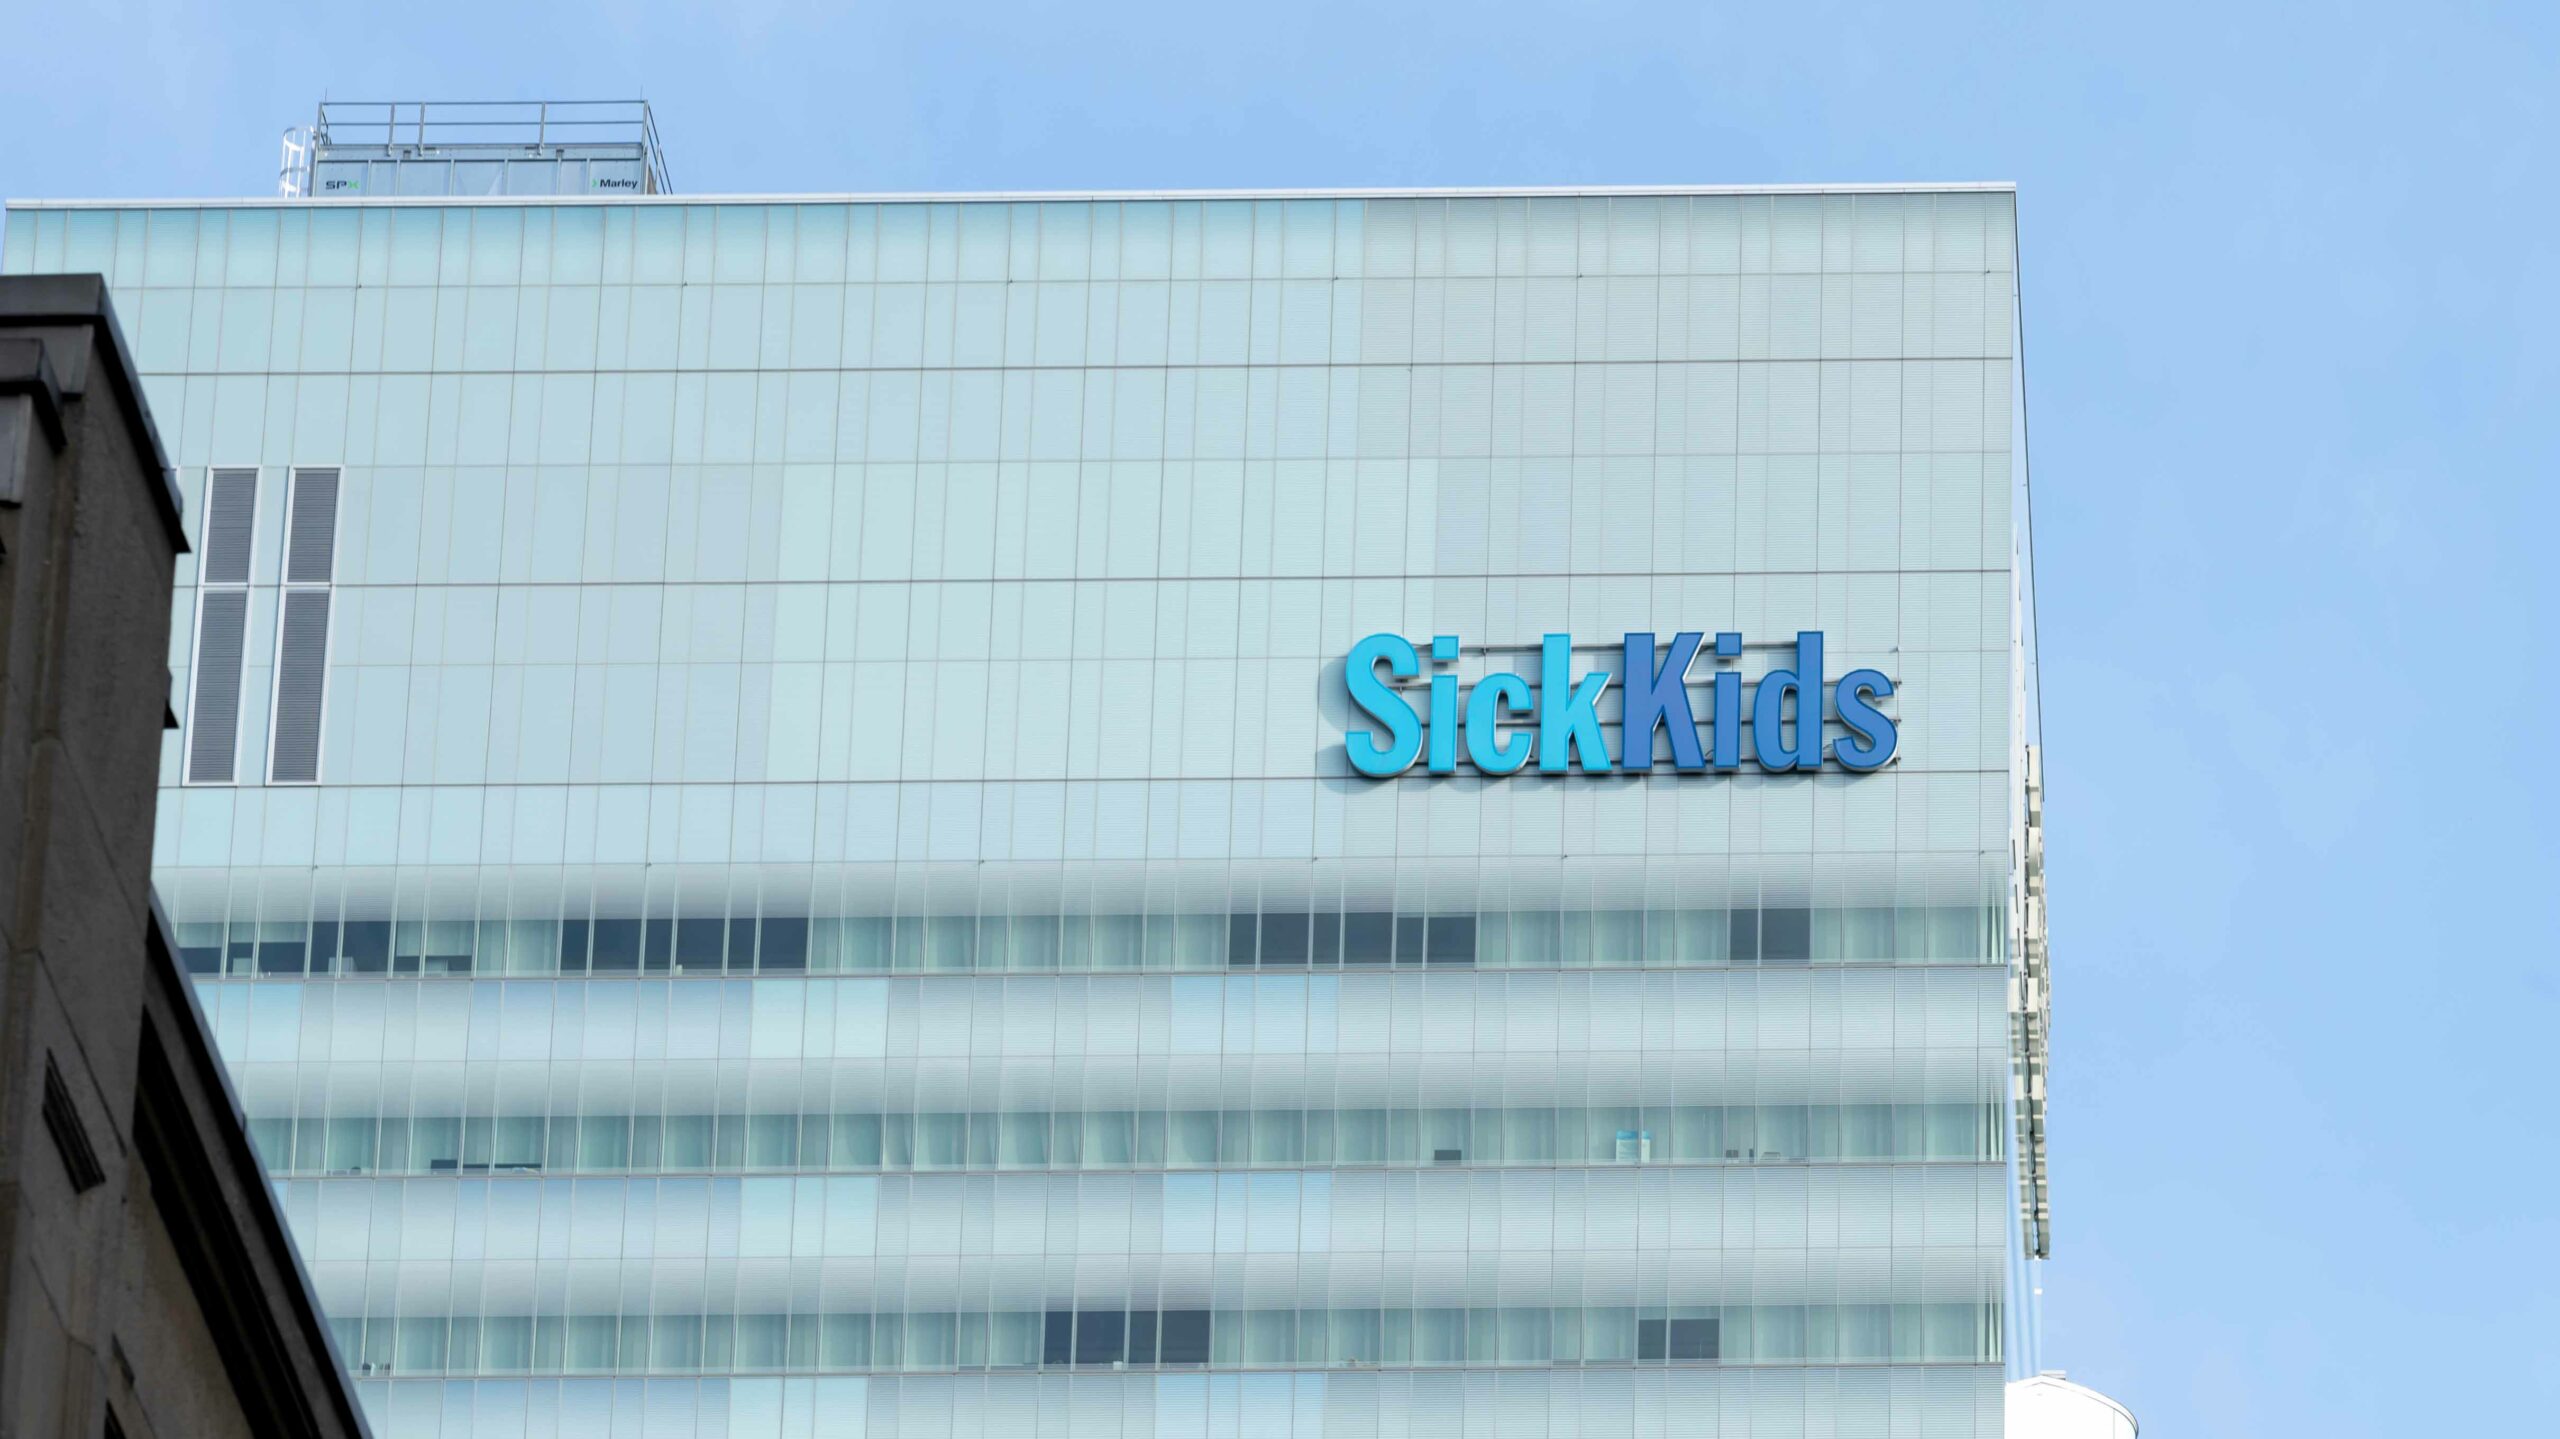 Notorious ransomware gang apologizes for SickKids cyberattack